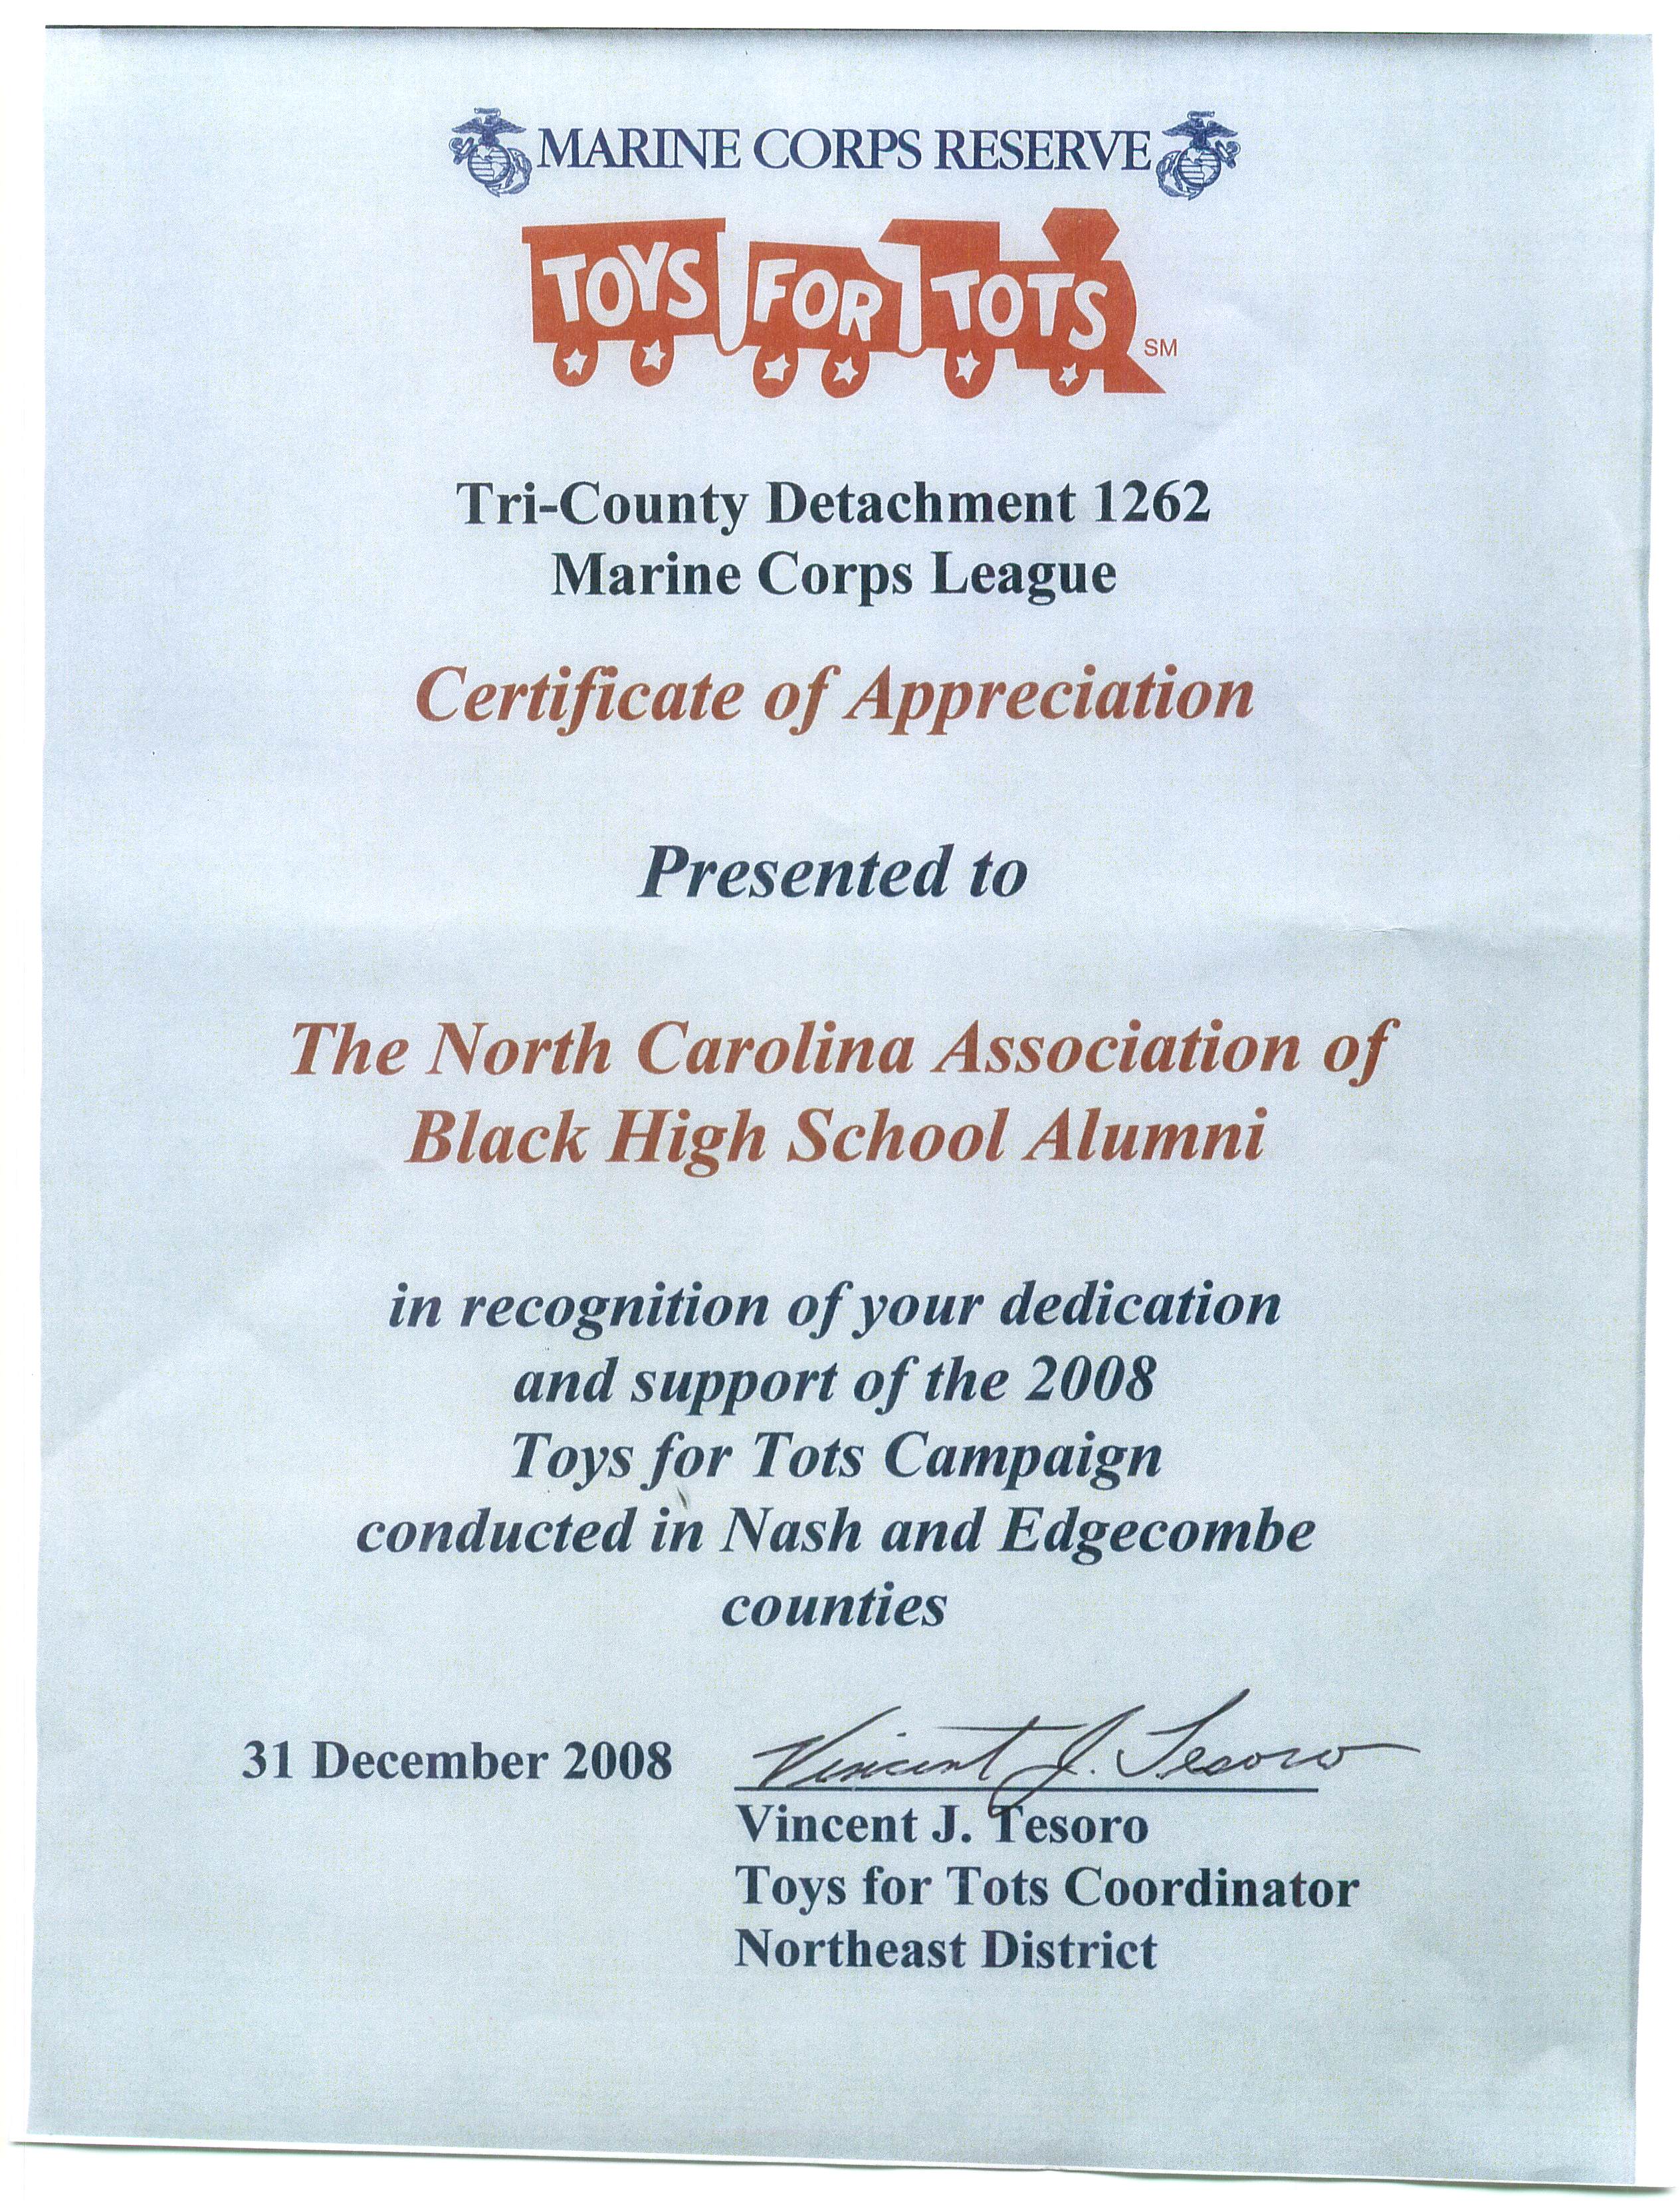 CERTIFICATE OF APPRECIATION FROM TOYS FOR TOTS TO NCABHSA 2008 